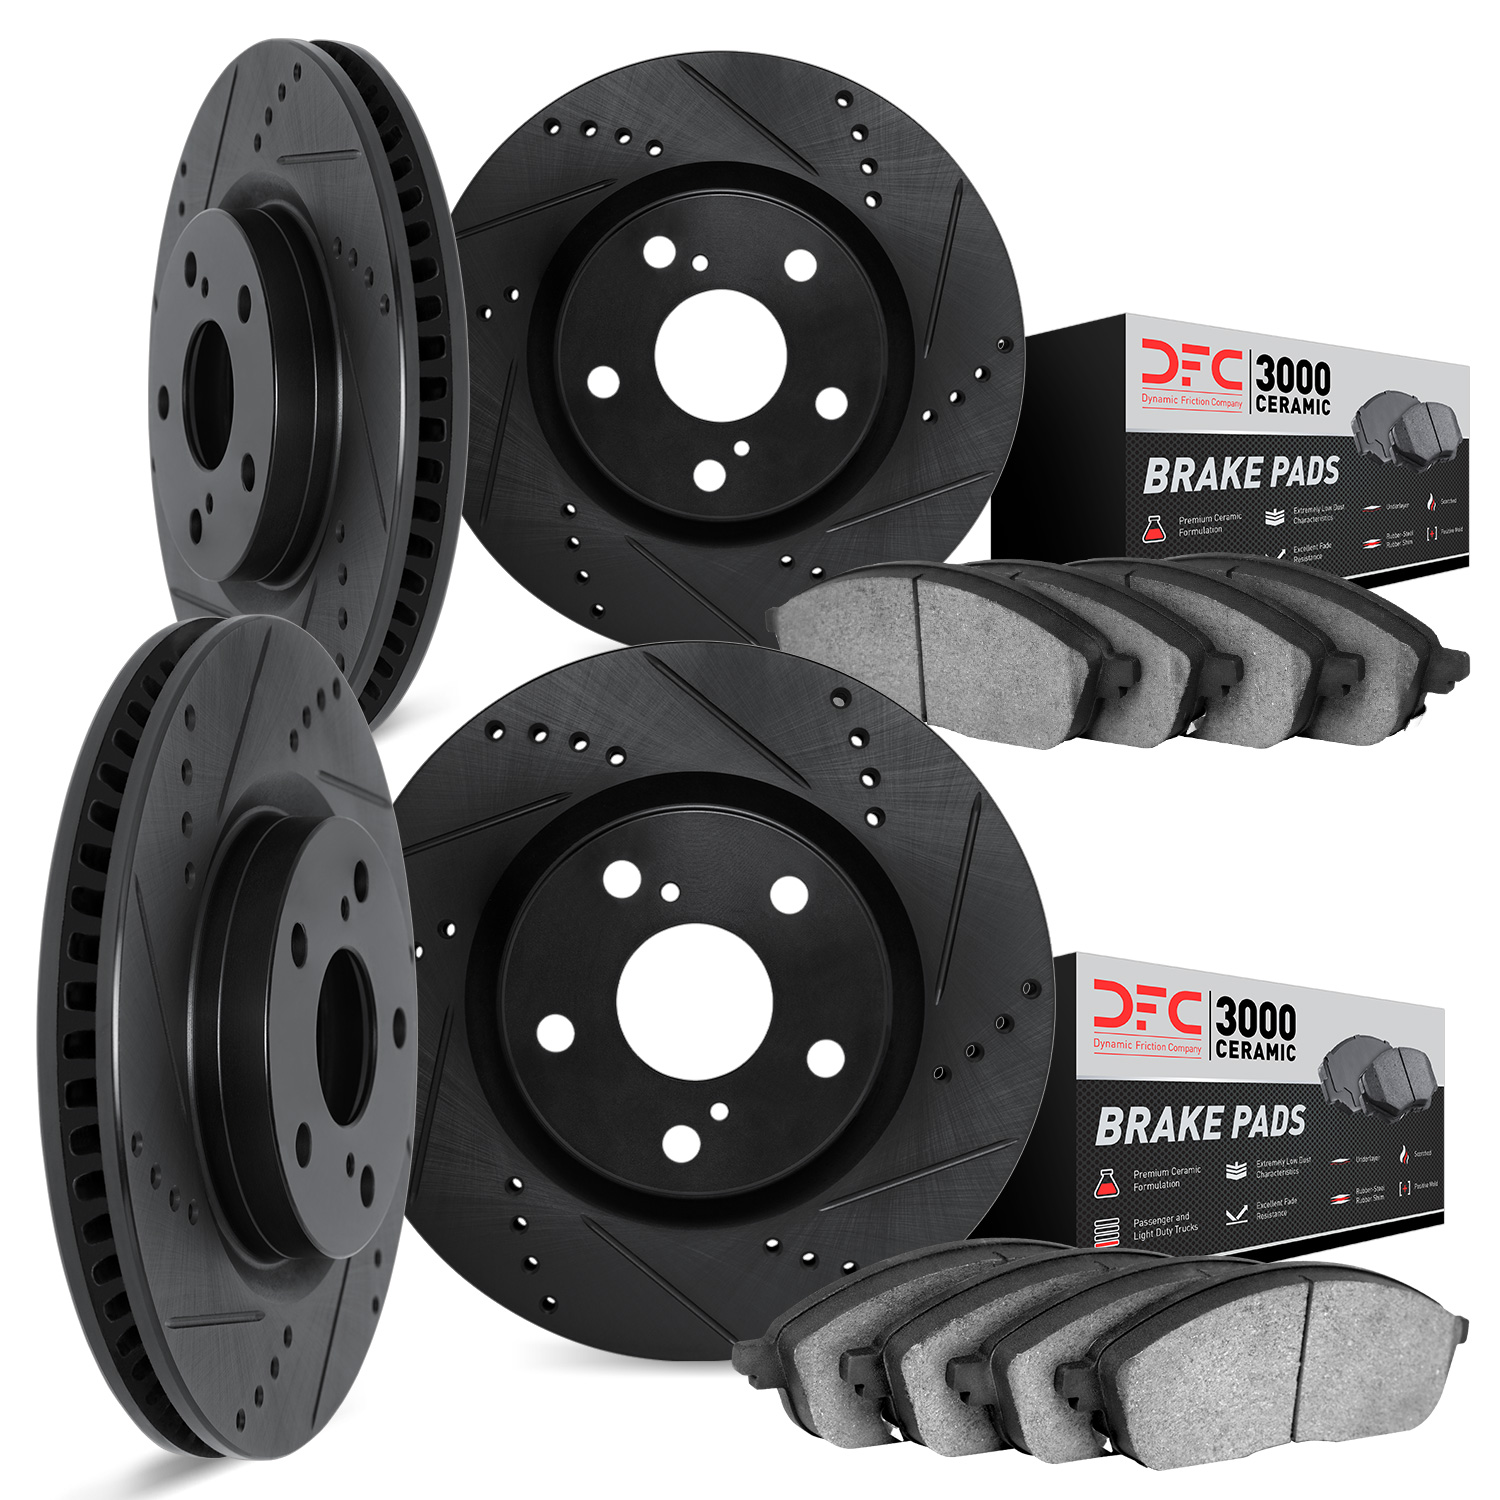 8304-31049 Drilled/Slotted Brake Rotors with 3000-Series Ceramic Brake Pads Kit [Black], 2004-2007 BMW, Position: Front and Rear